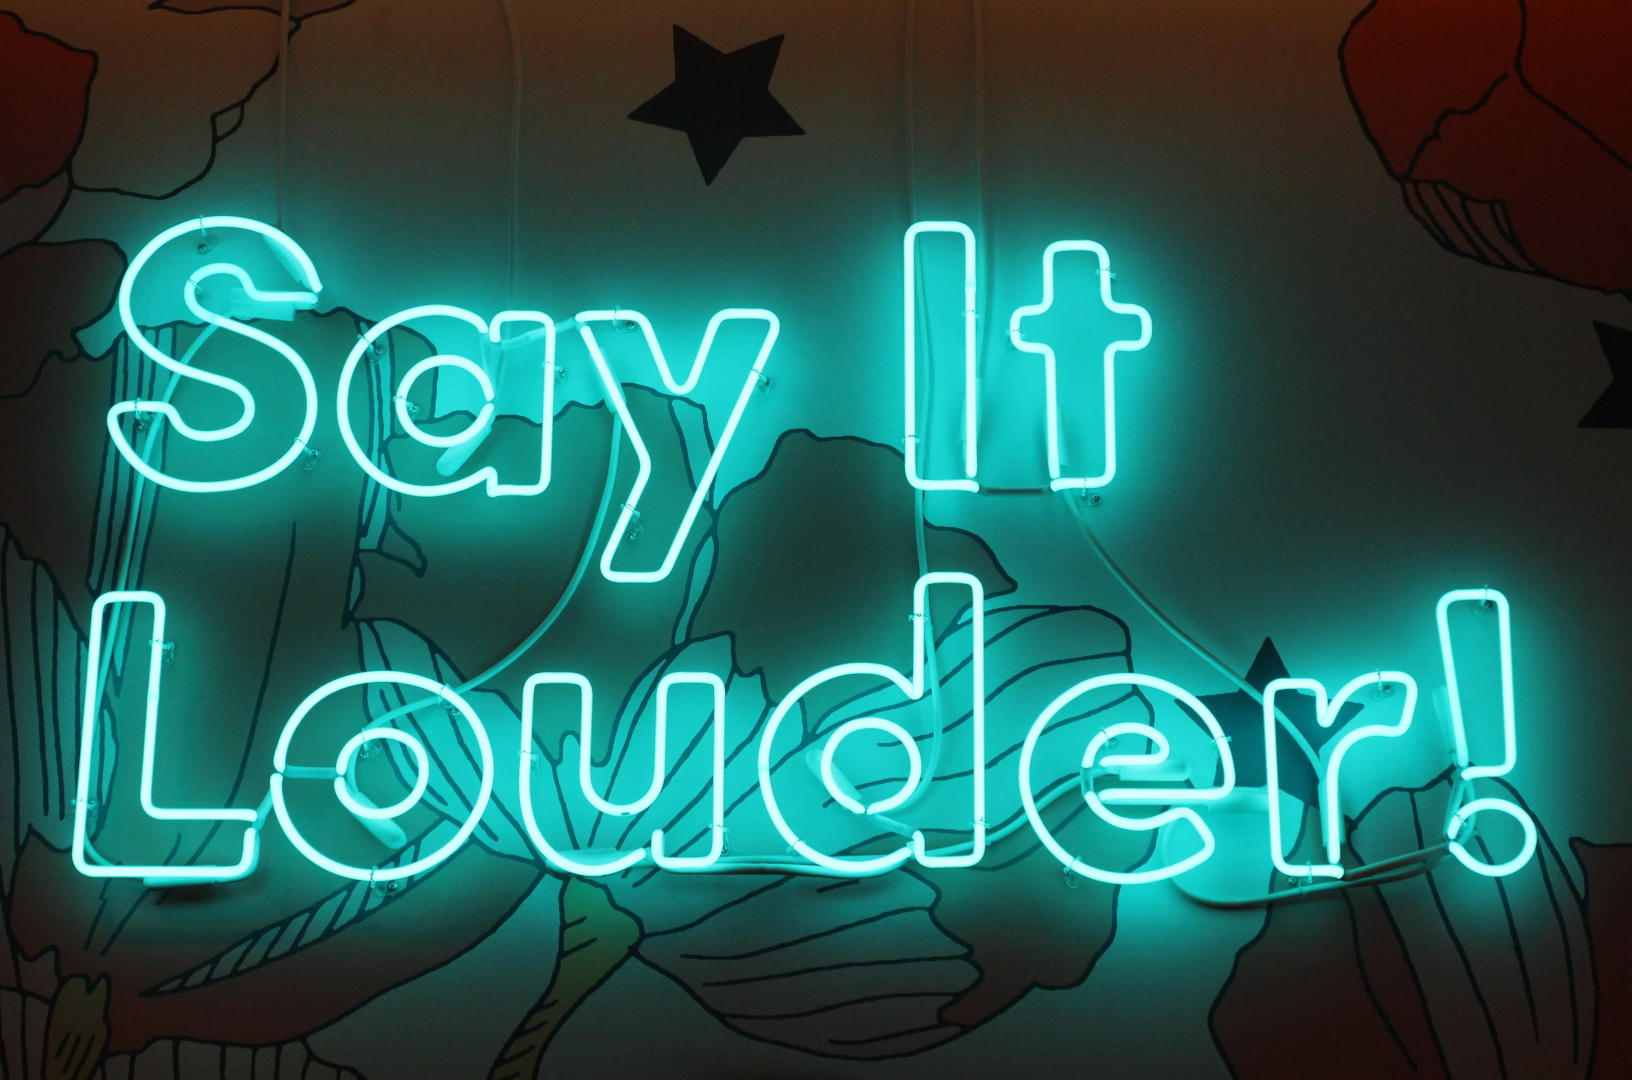 The sentence 'Say It Louder!' in large, green neon lights.